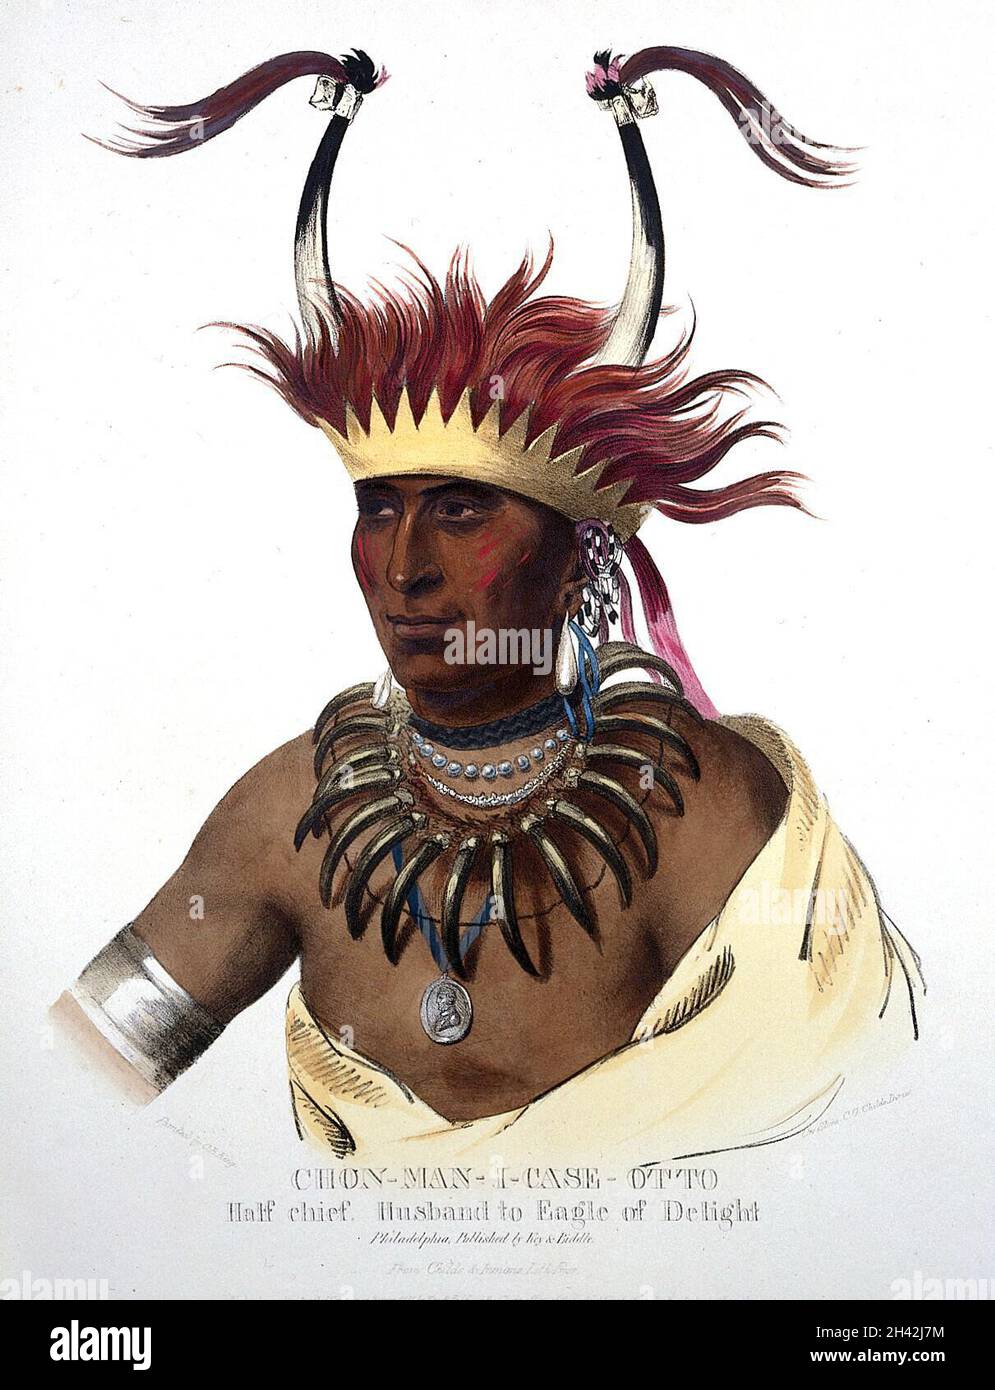 Shaumonekusse, a chief of the Oto (Otoe) tribe, wearing a crown hair piece with horns, a bear-claw necklace and a medallion. Colour lithograph by C. G. Childs after C. B. King, 1833. Stock Photo